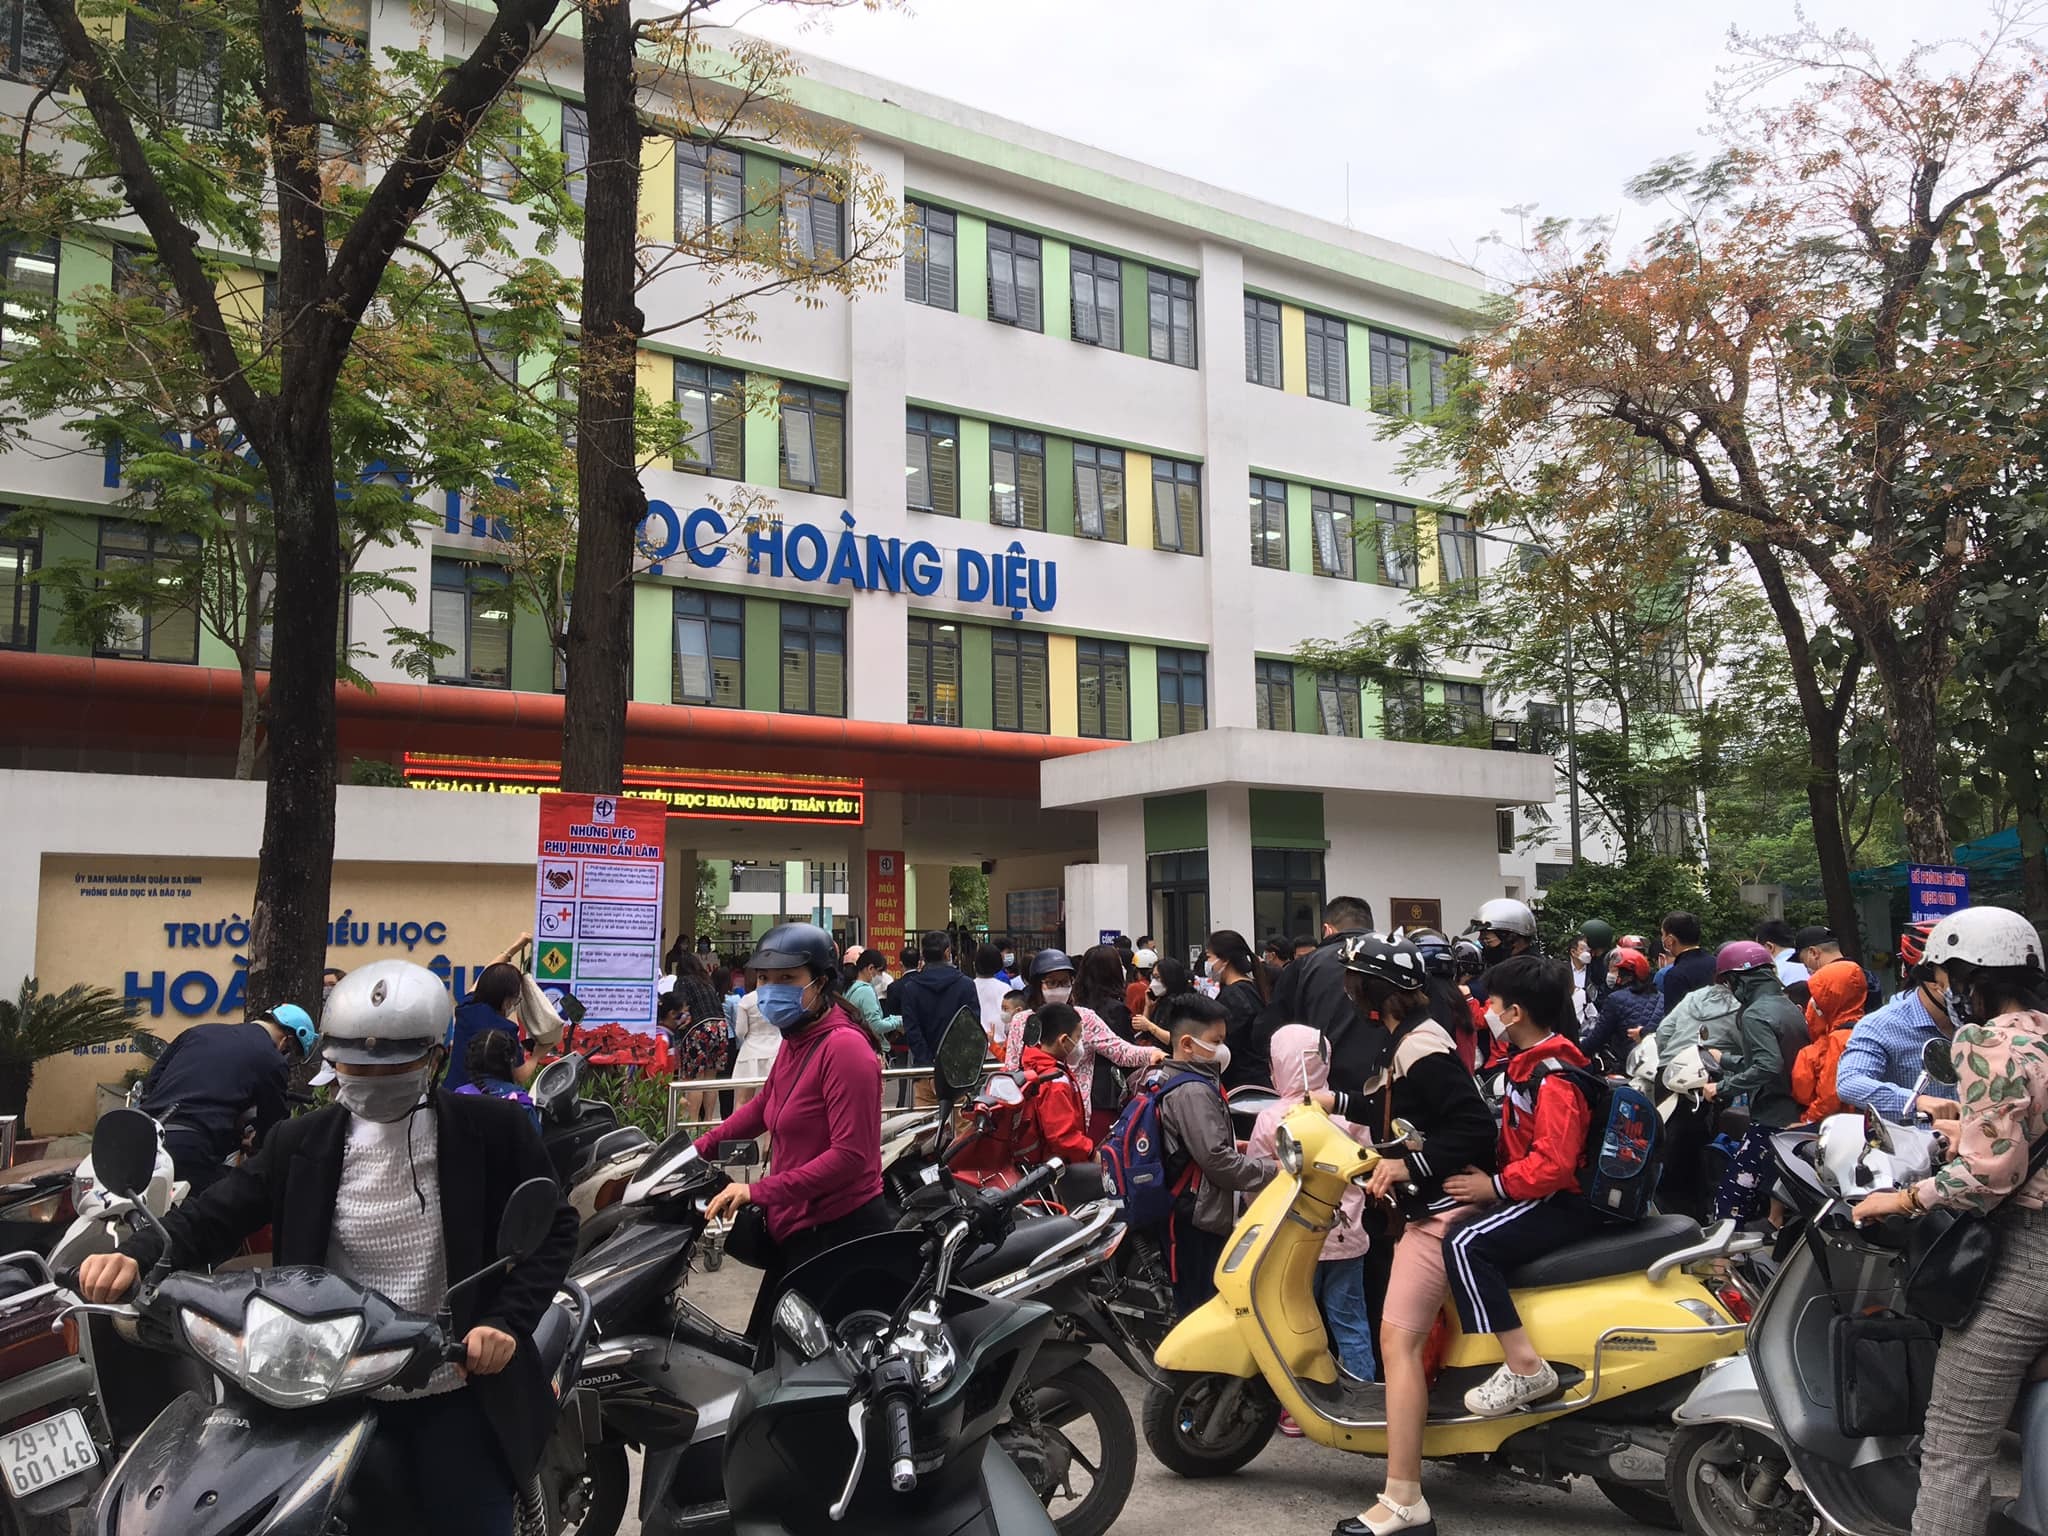 Students in grades 1-6 in Hanoi are as eager to go to school as the opening day, many of them wake up at 5am